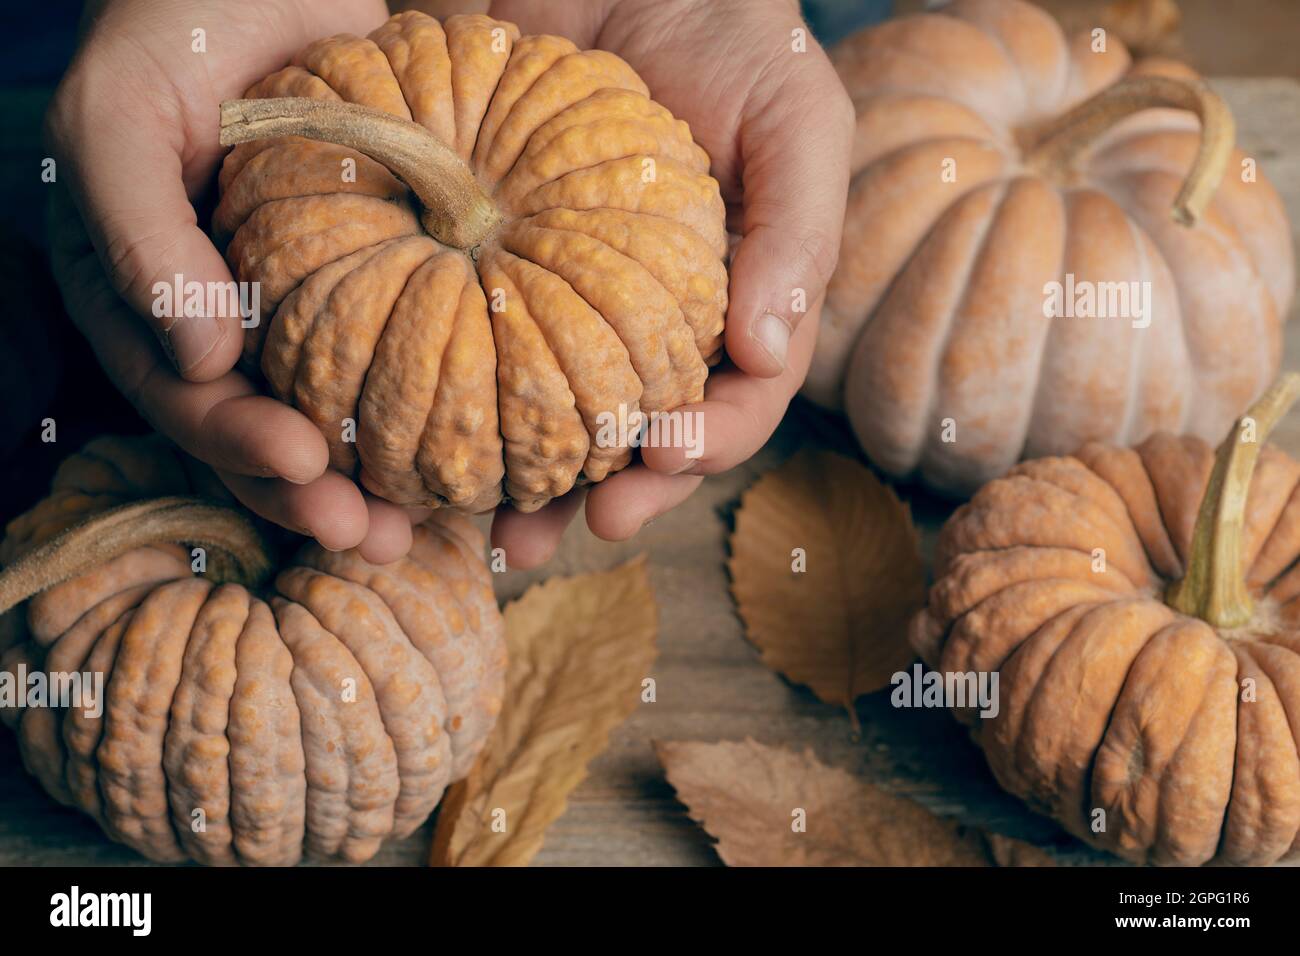 Man hold a futsu black japanese pumpkin over a table full of various kind of pumpkins Stock Photo